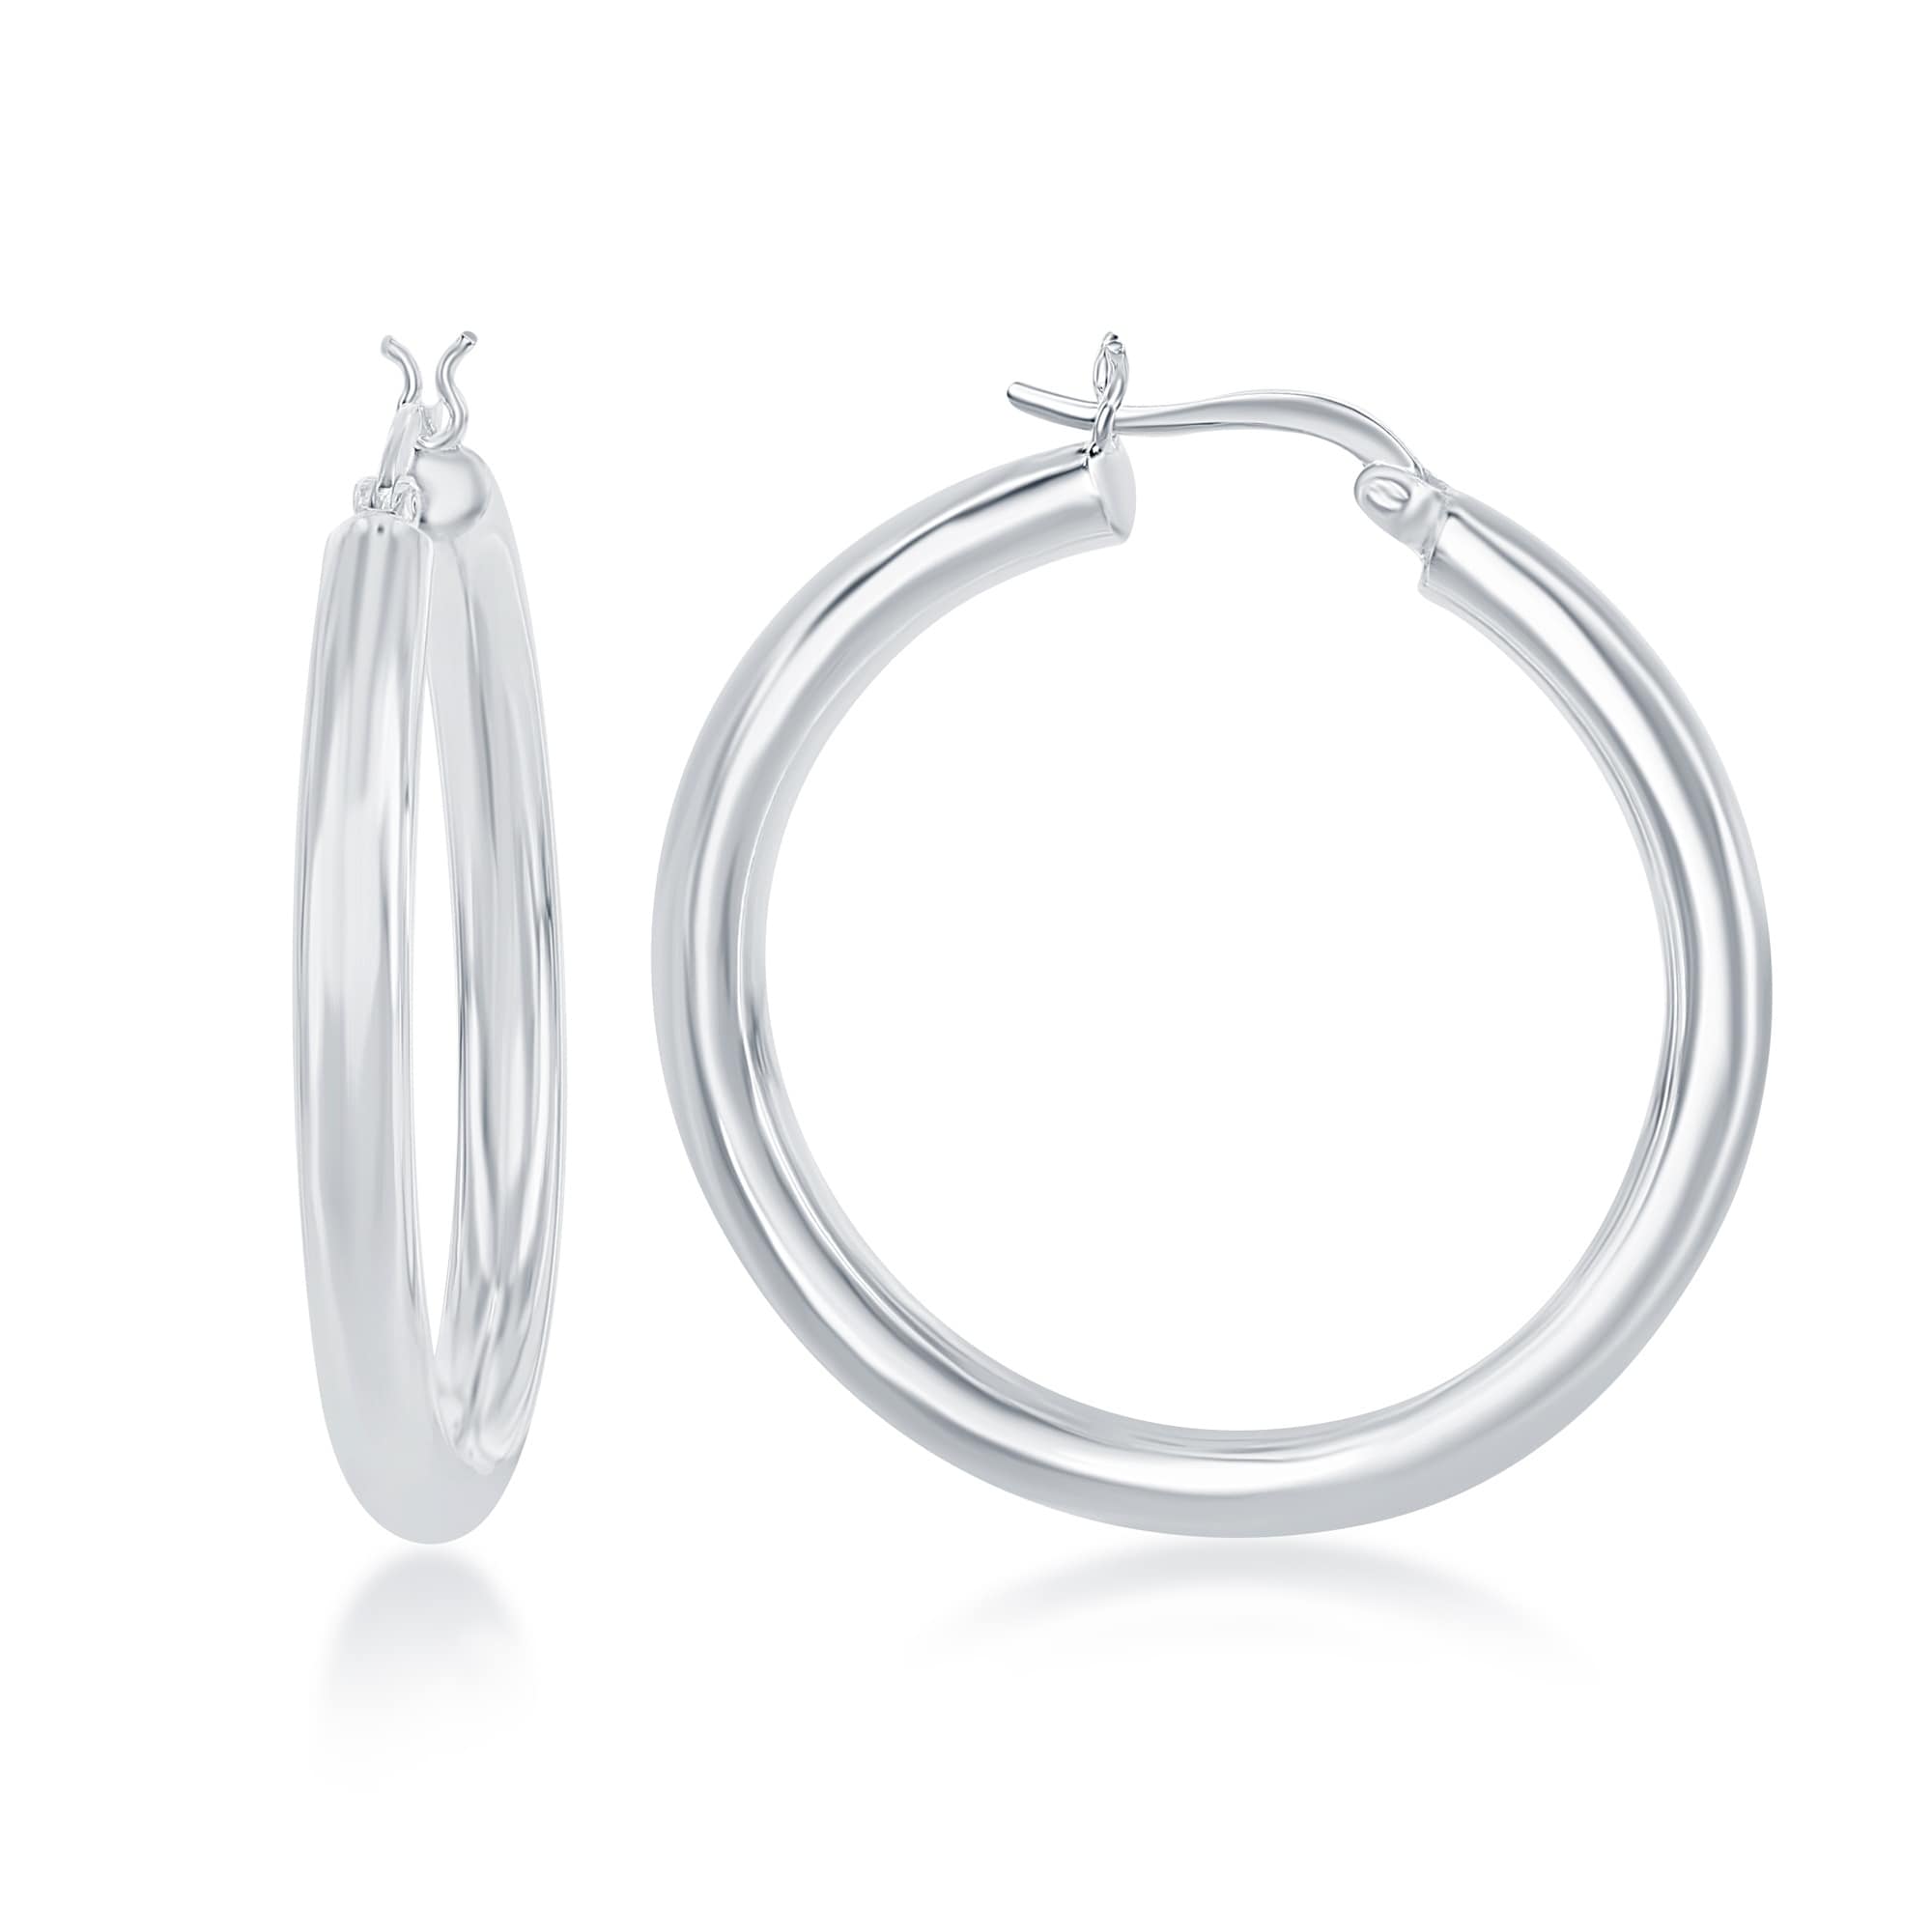 .925 Sterling Silver 48 MM Gold Plated Twisted Satin Oval Hoop Earrings 